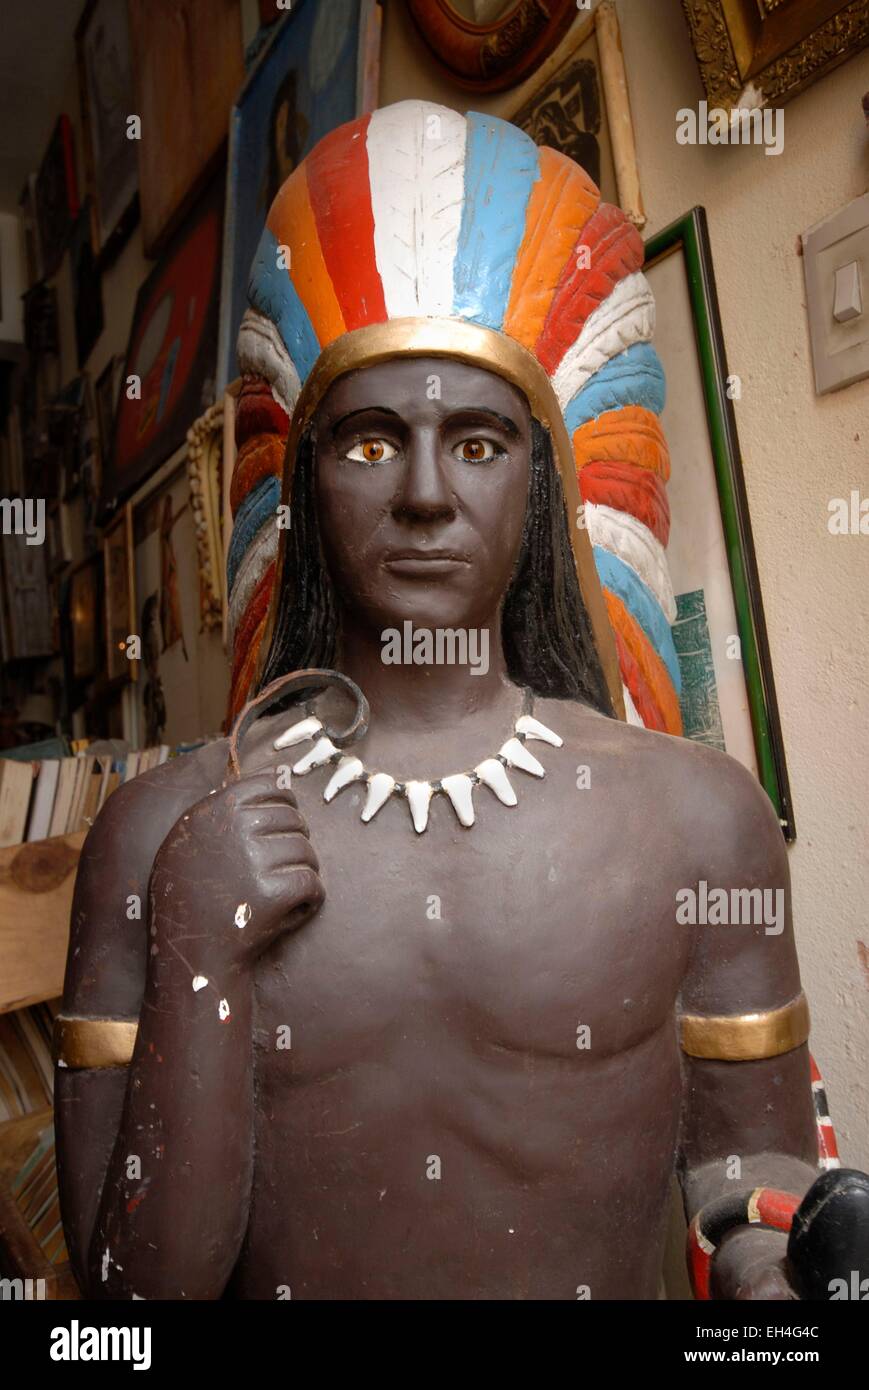 Brazil, Bahia state, Salvador de Bahia, historical center listed as World Heritage by UNESCO, Pelourinho district, painted statue of an Indian in a flea market Stock Photo